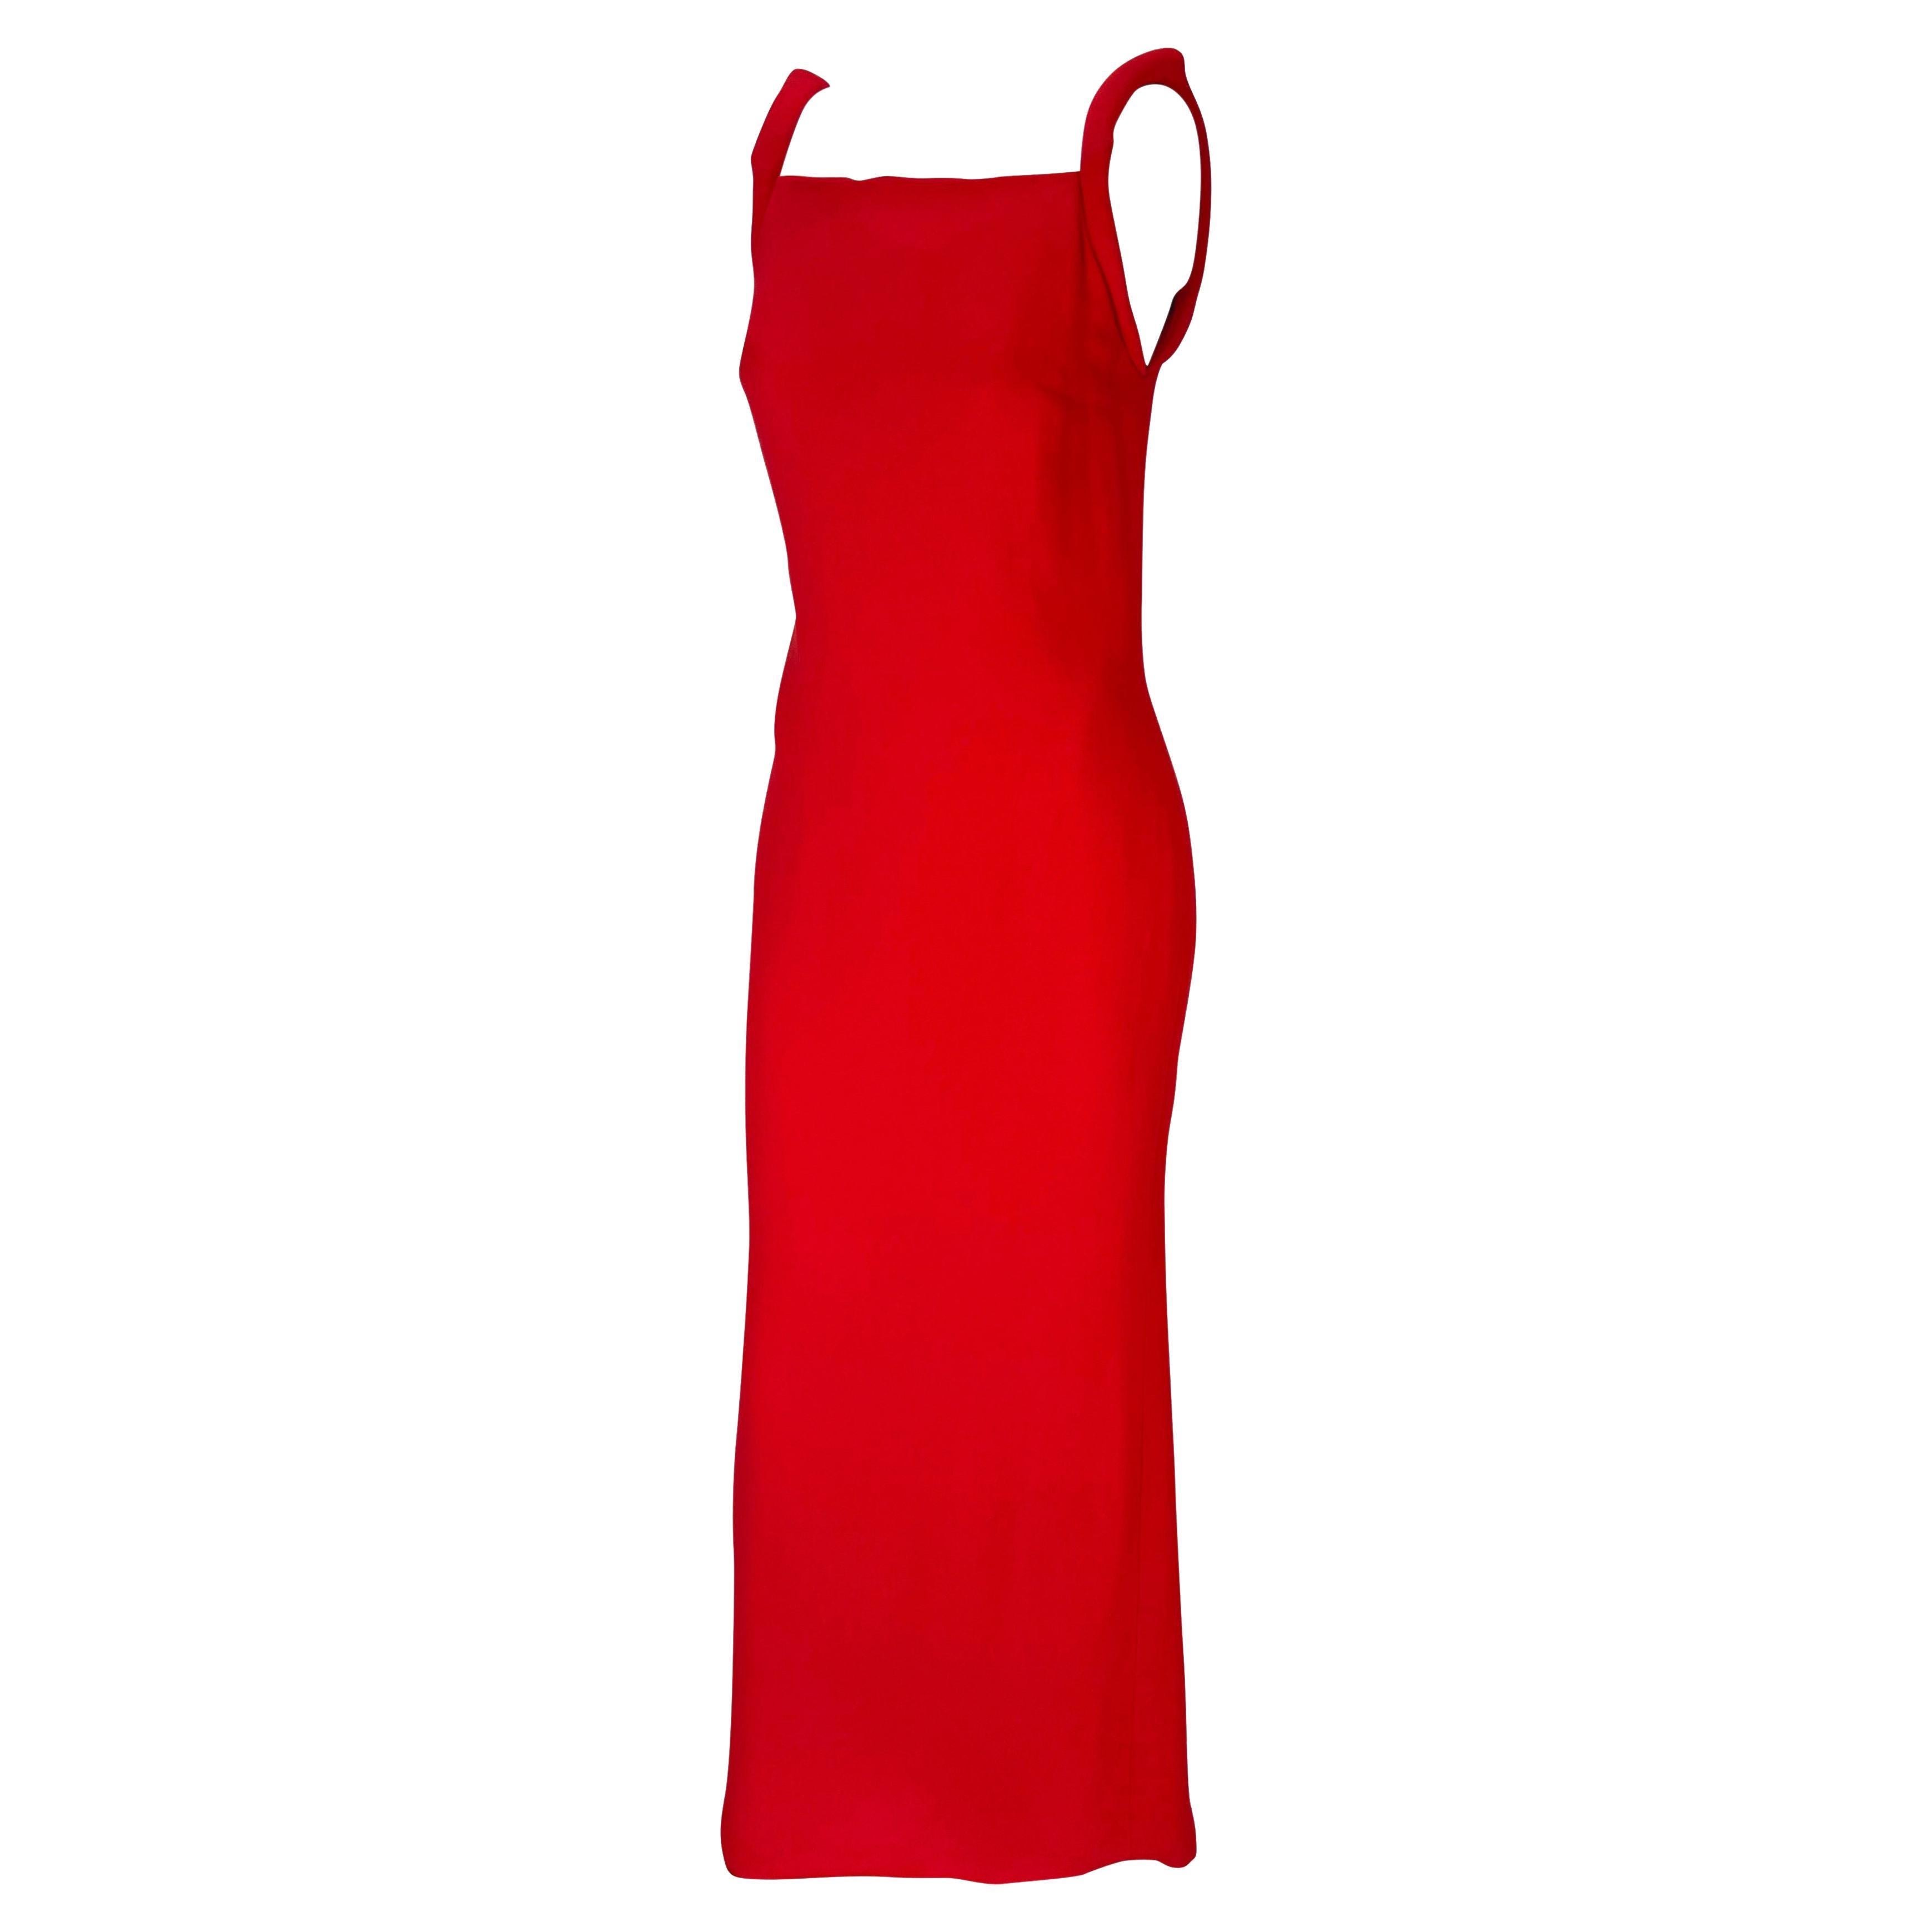 Presenting a gorgeous vibrant red Gianni Versace Couture gown, designed by Donatella Versace. From 1998, this column gown features a high square neckline and low semi-exposed back. This dress is made complete with padded shoulder straps.